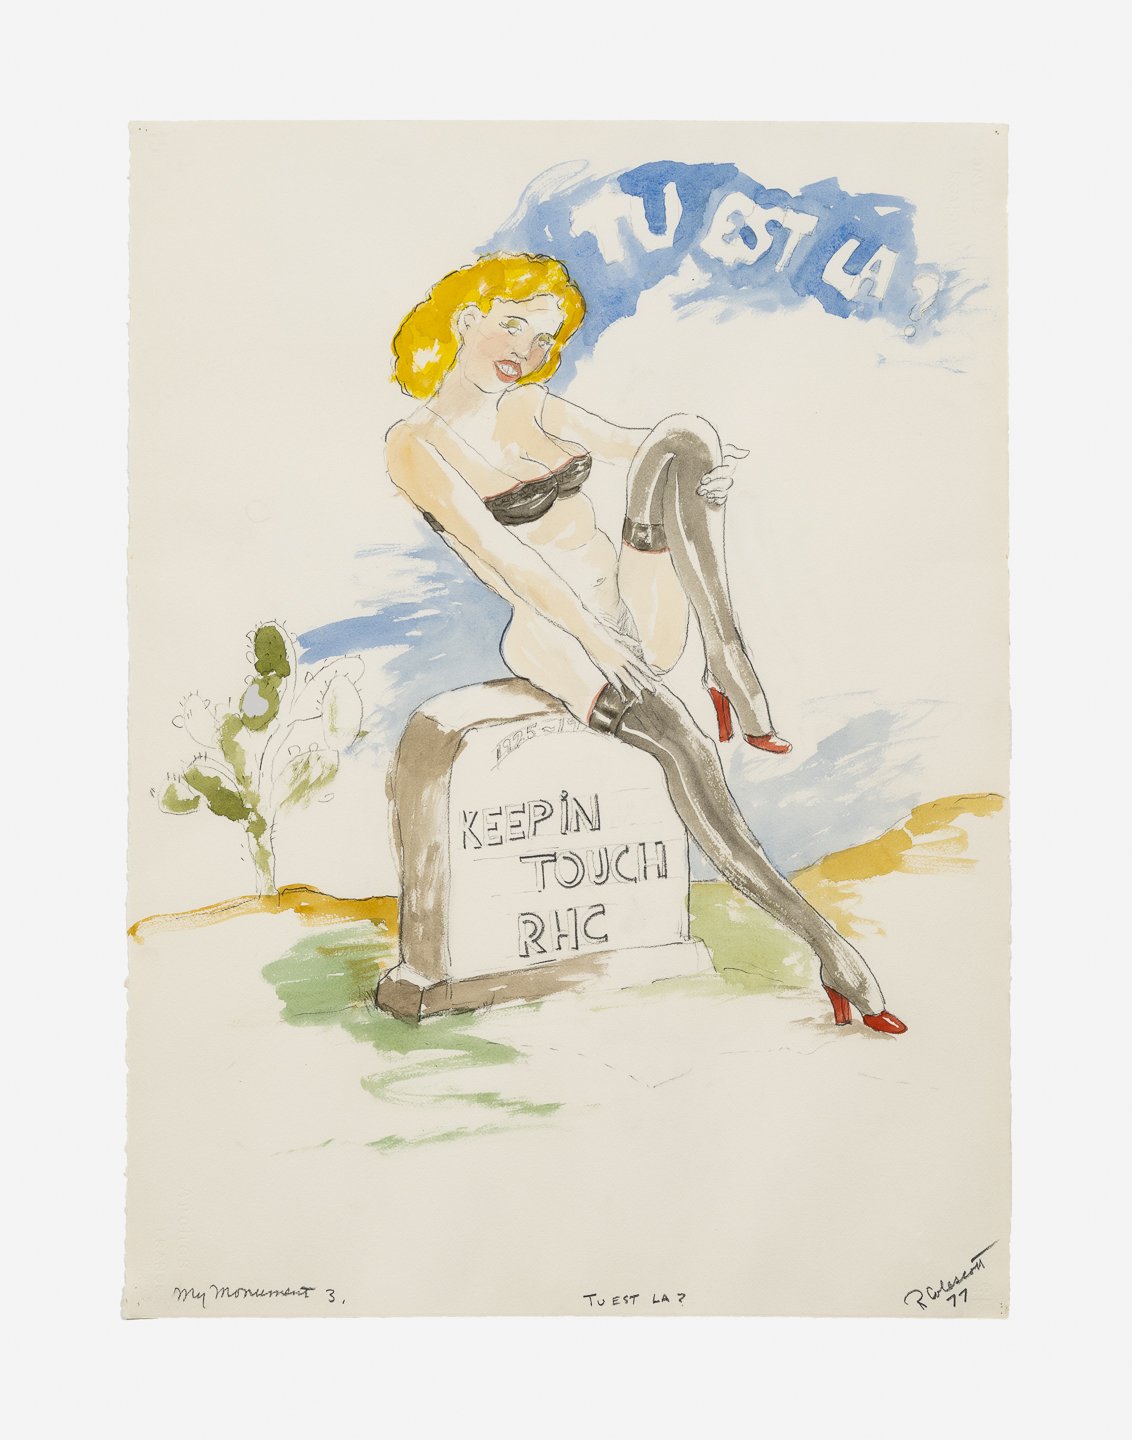    &nbsp;Robert Colescott,  My Monument 3 , 1977. Watercolor and graphite on paper; Sheet: 30 1/4 x 22 1/4 in (76.8 x 57.8 cm) Framed: 37 3/4 x 29 3/4 in (95.9 x 75.6 cm). © The Robert H. Colescott Separate Property Trust / Artists Rights Society (AR